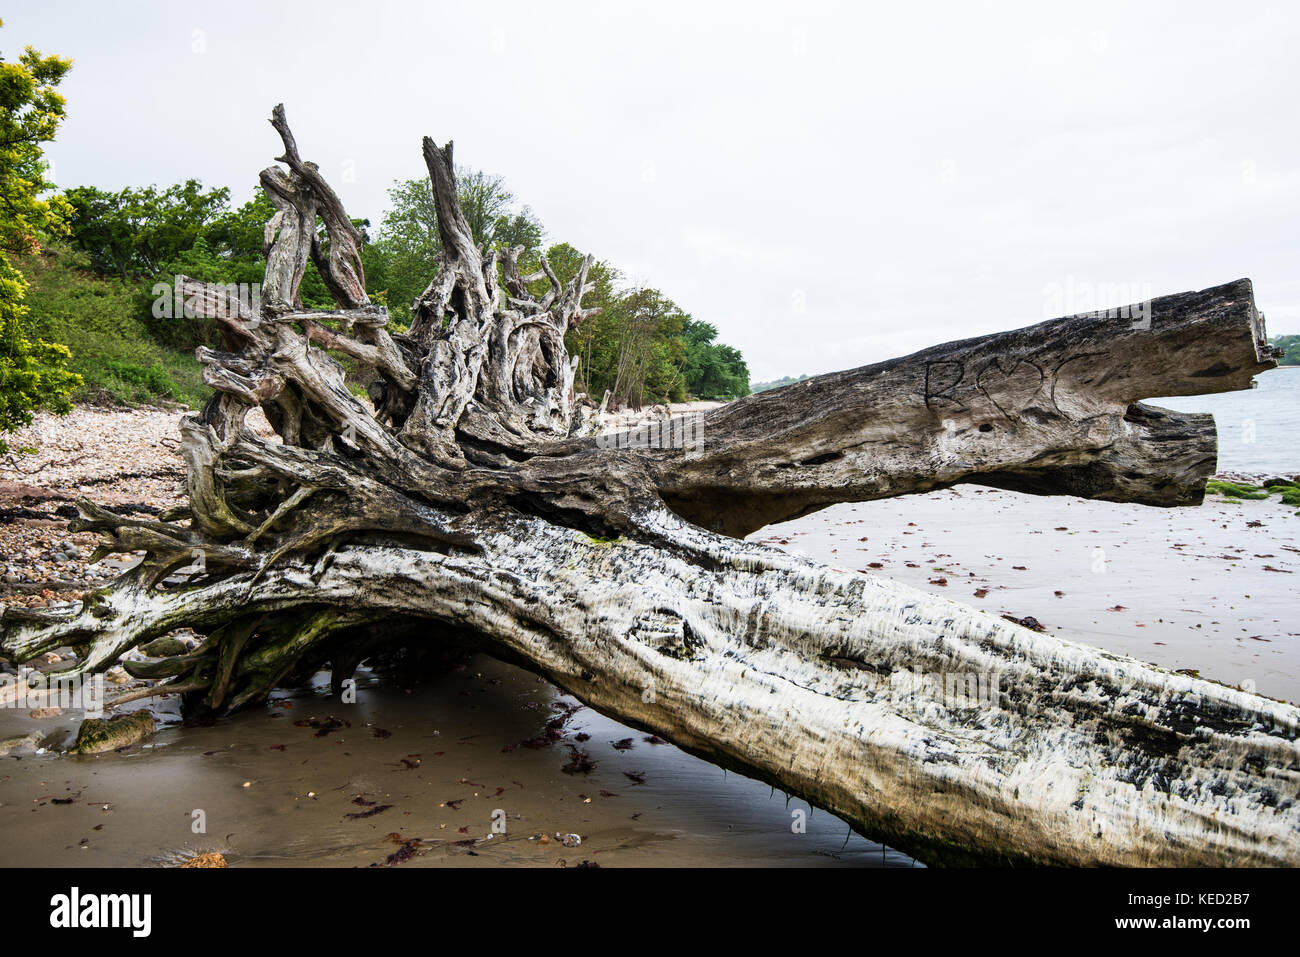 Sea Level Rise - Tree Collapse. As the average sea level rises - maybe due to global warming - so trees that were once on land, collapse into the sea. Stock Photo